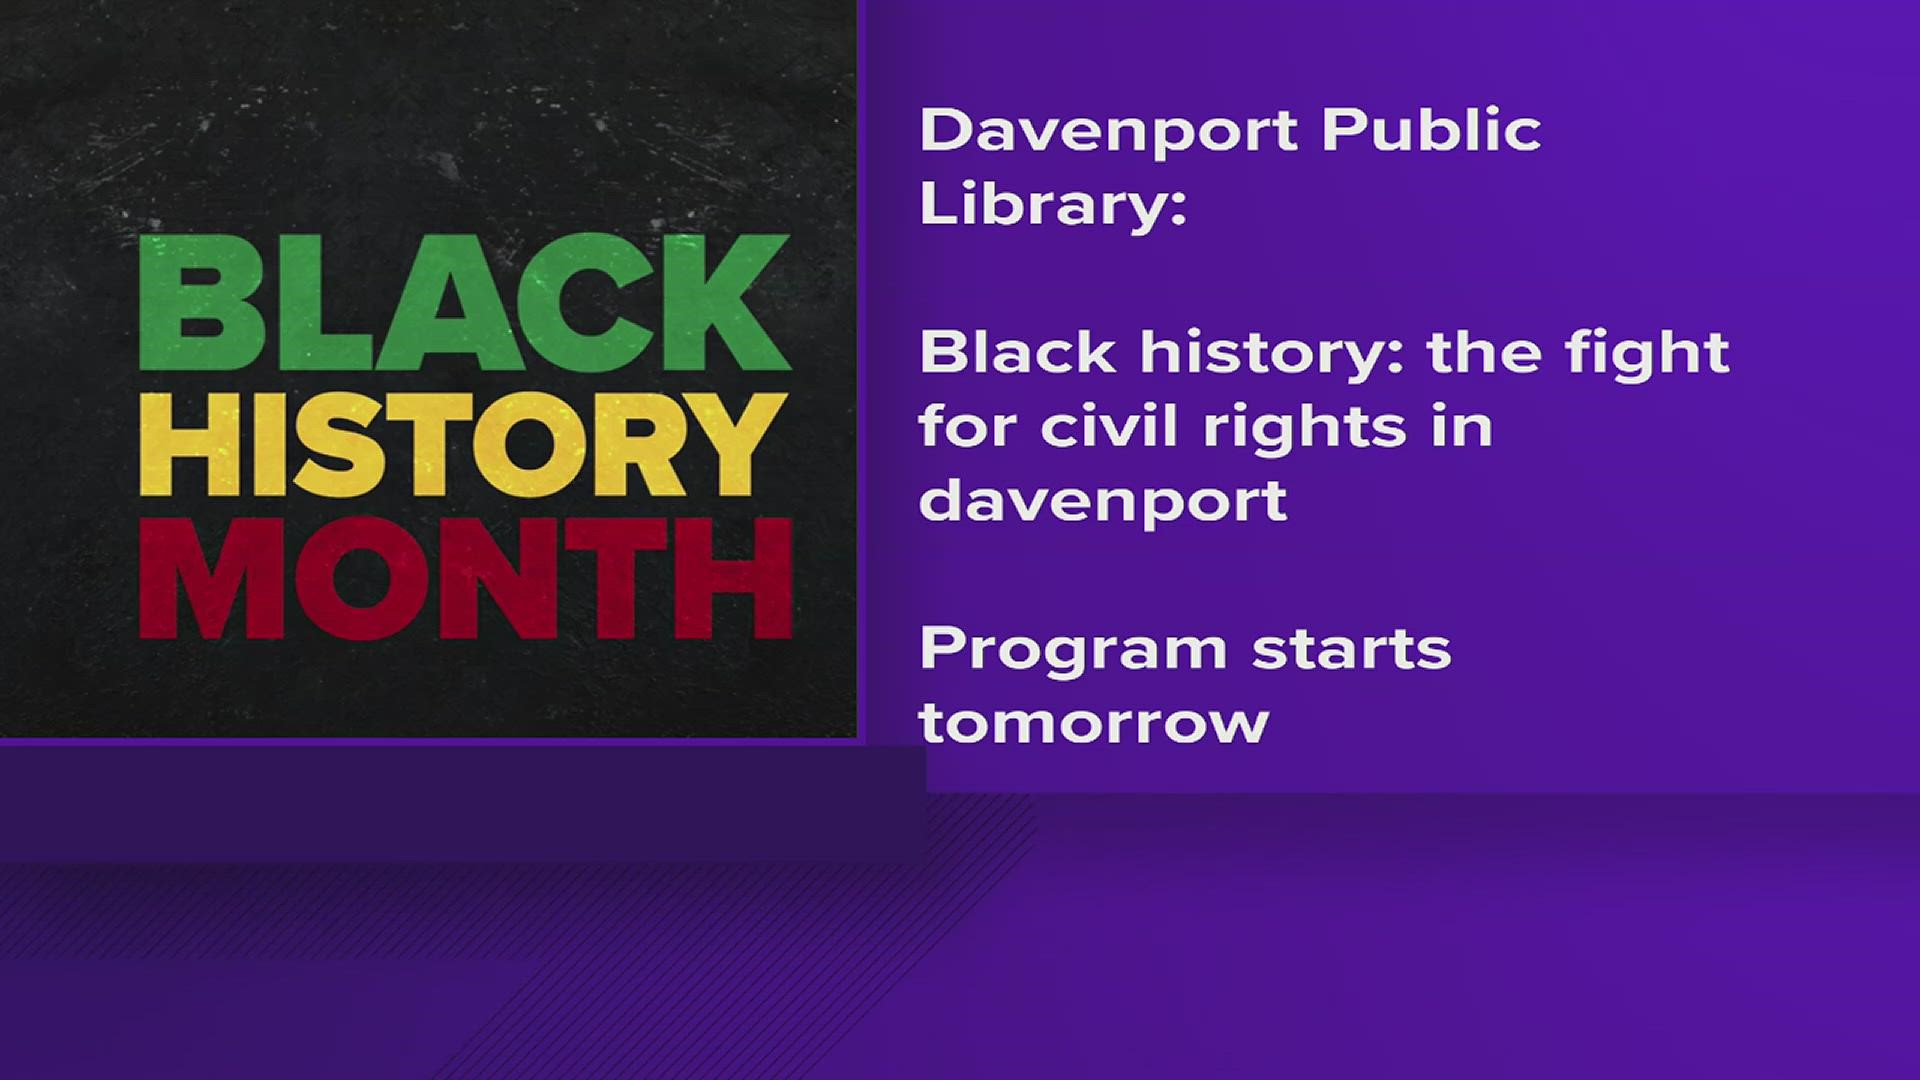 Black History Month is coming, and there are events taking place all over the Quad Cities to celebrate African American history and culture.